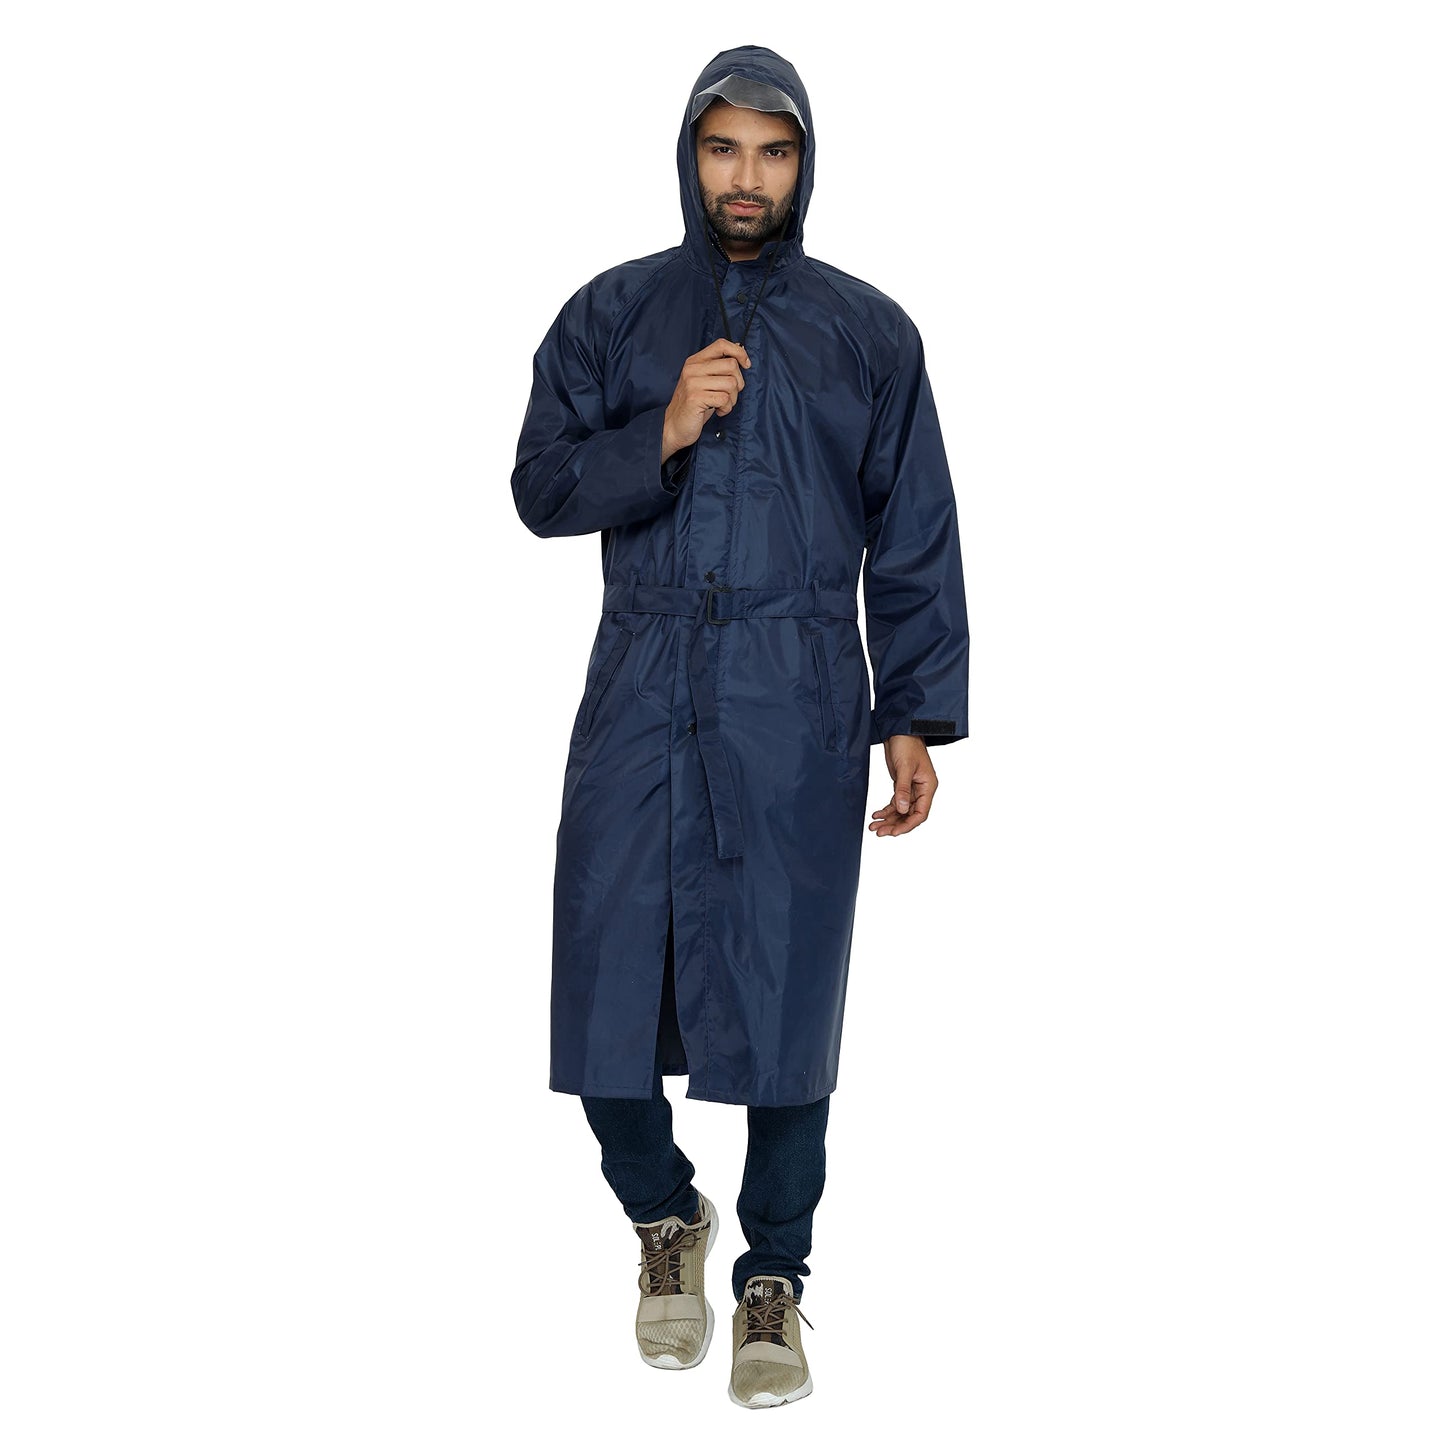 THE CLOWNFISH Mikado Series Unisex Waterproof Polyester Long Coat/Standard Length Raincoat With Adjustable Hood And Reflector Logo At Back For Night Visibility (Blue-Free Size), Black